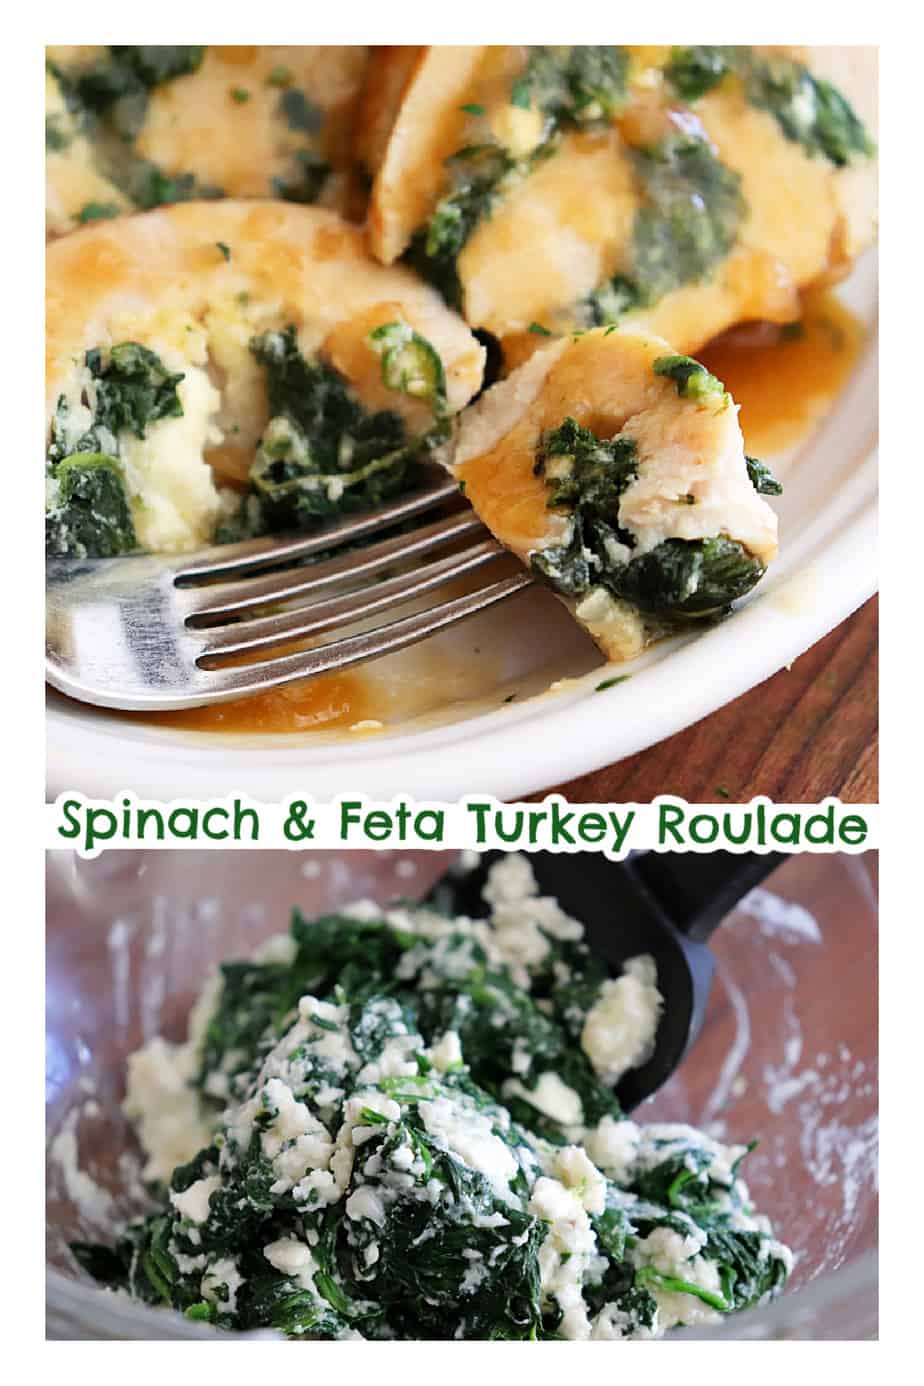 Pin for Spinach and Feta Turkey Roulade